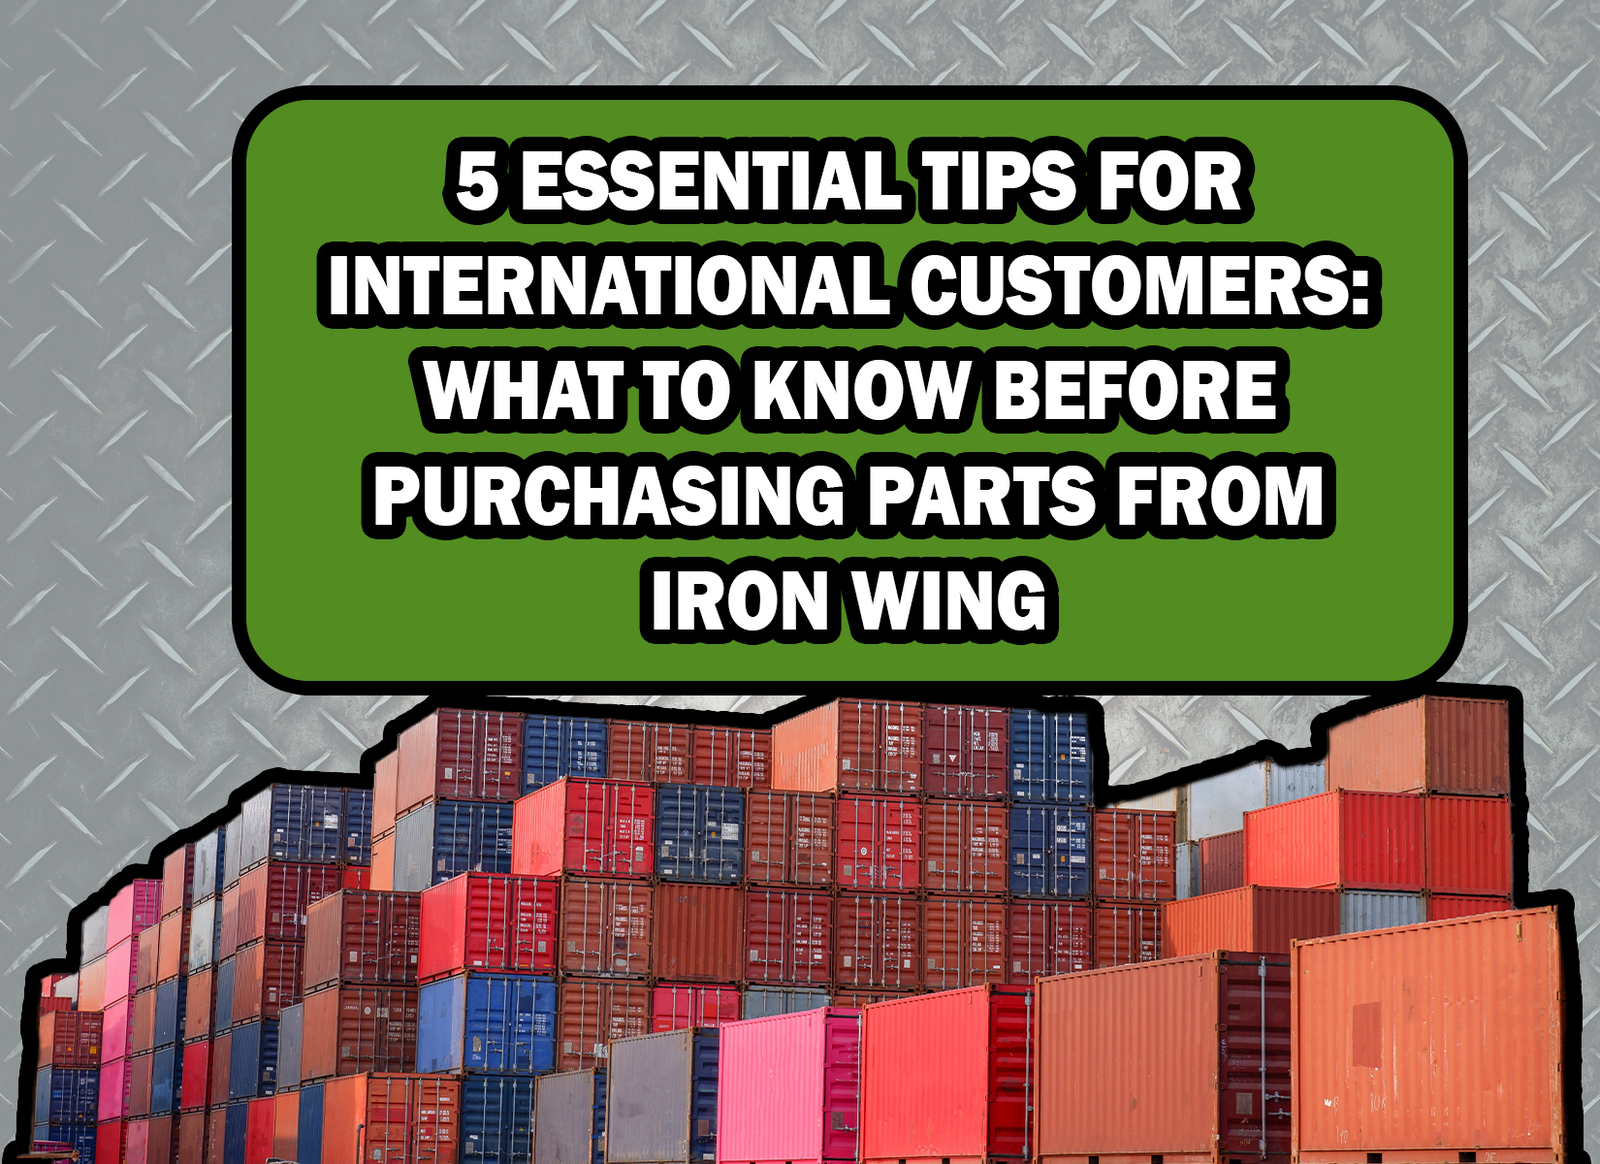 5 Essential Tips for International Customers: What to Know Before Purchasing Parts from Iron Wing